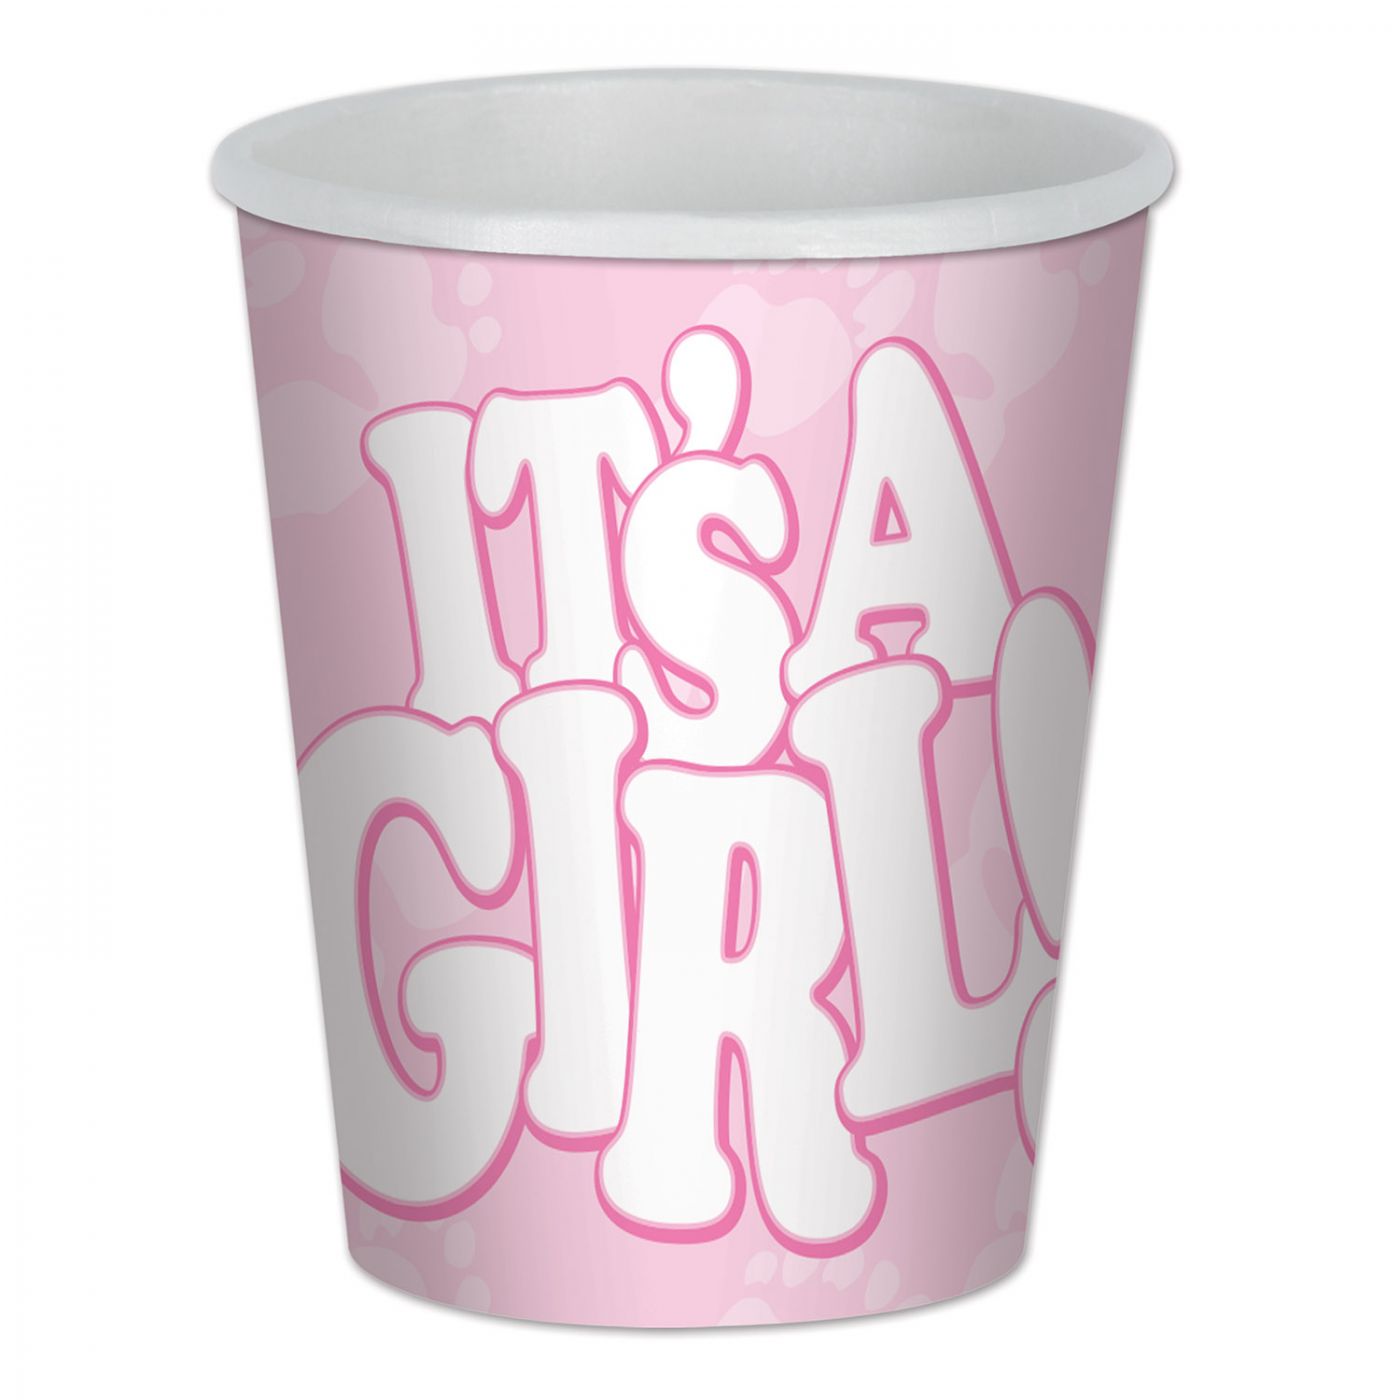 It's A Girl! Beverage Cups (12) image